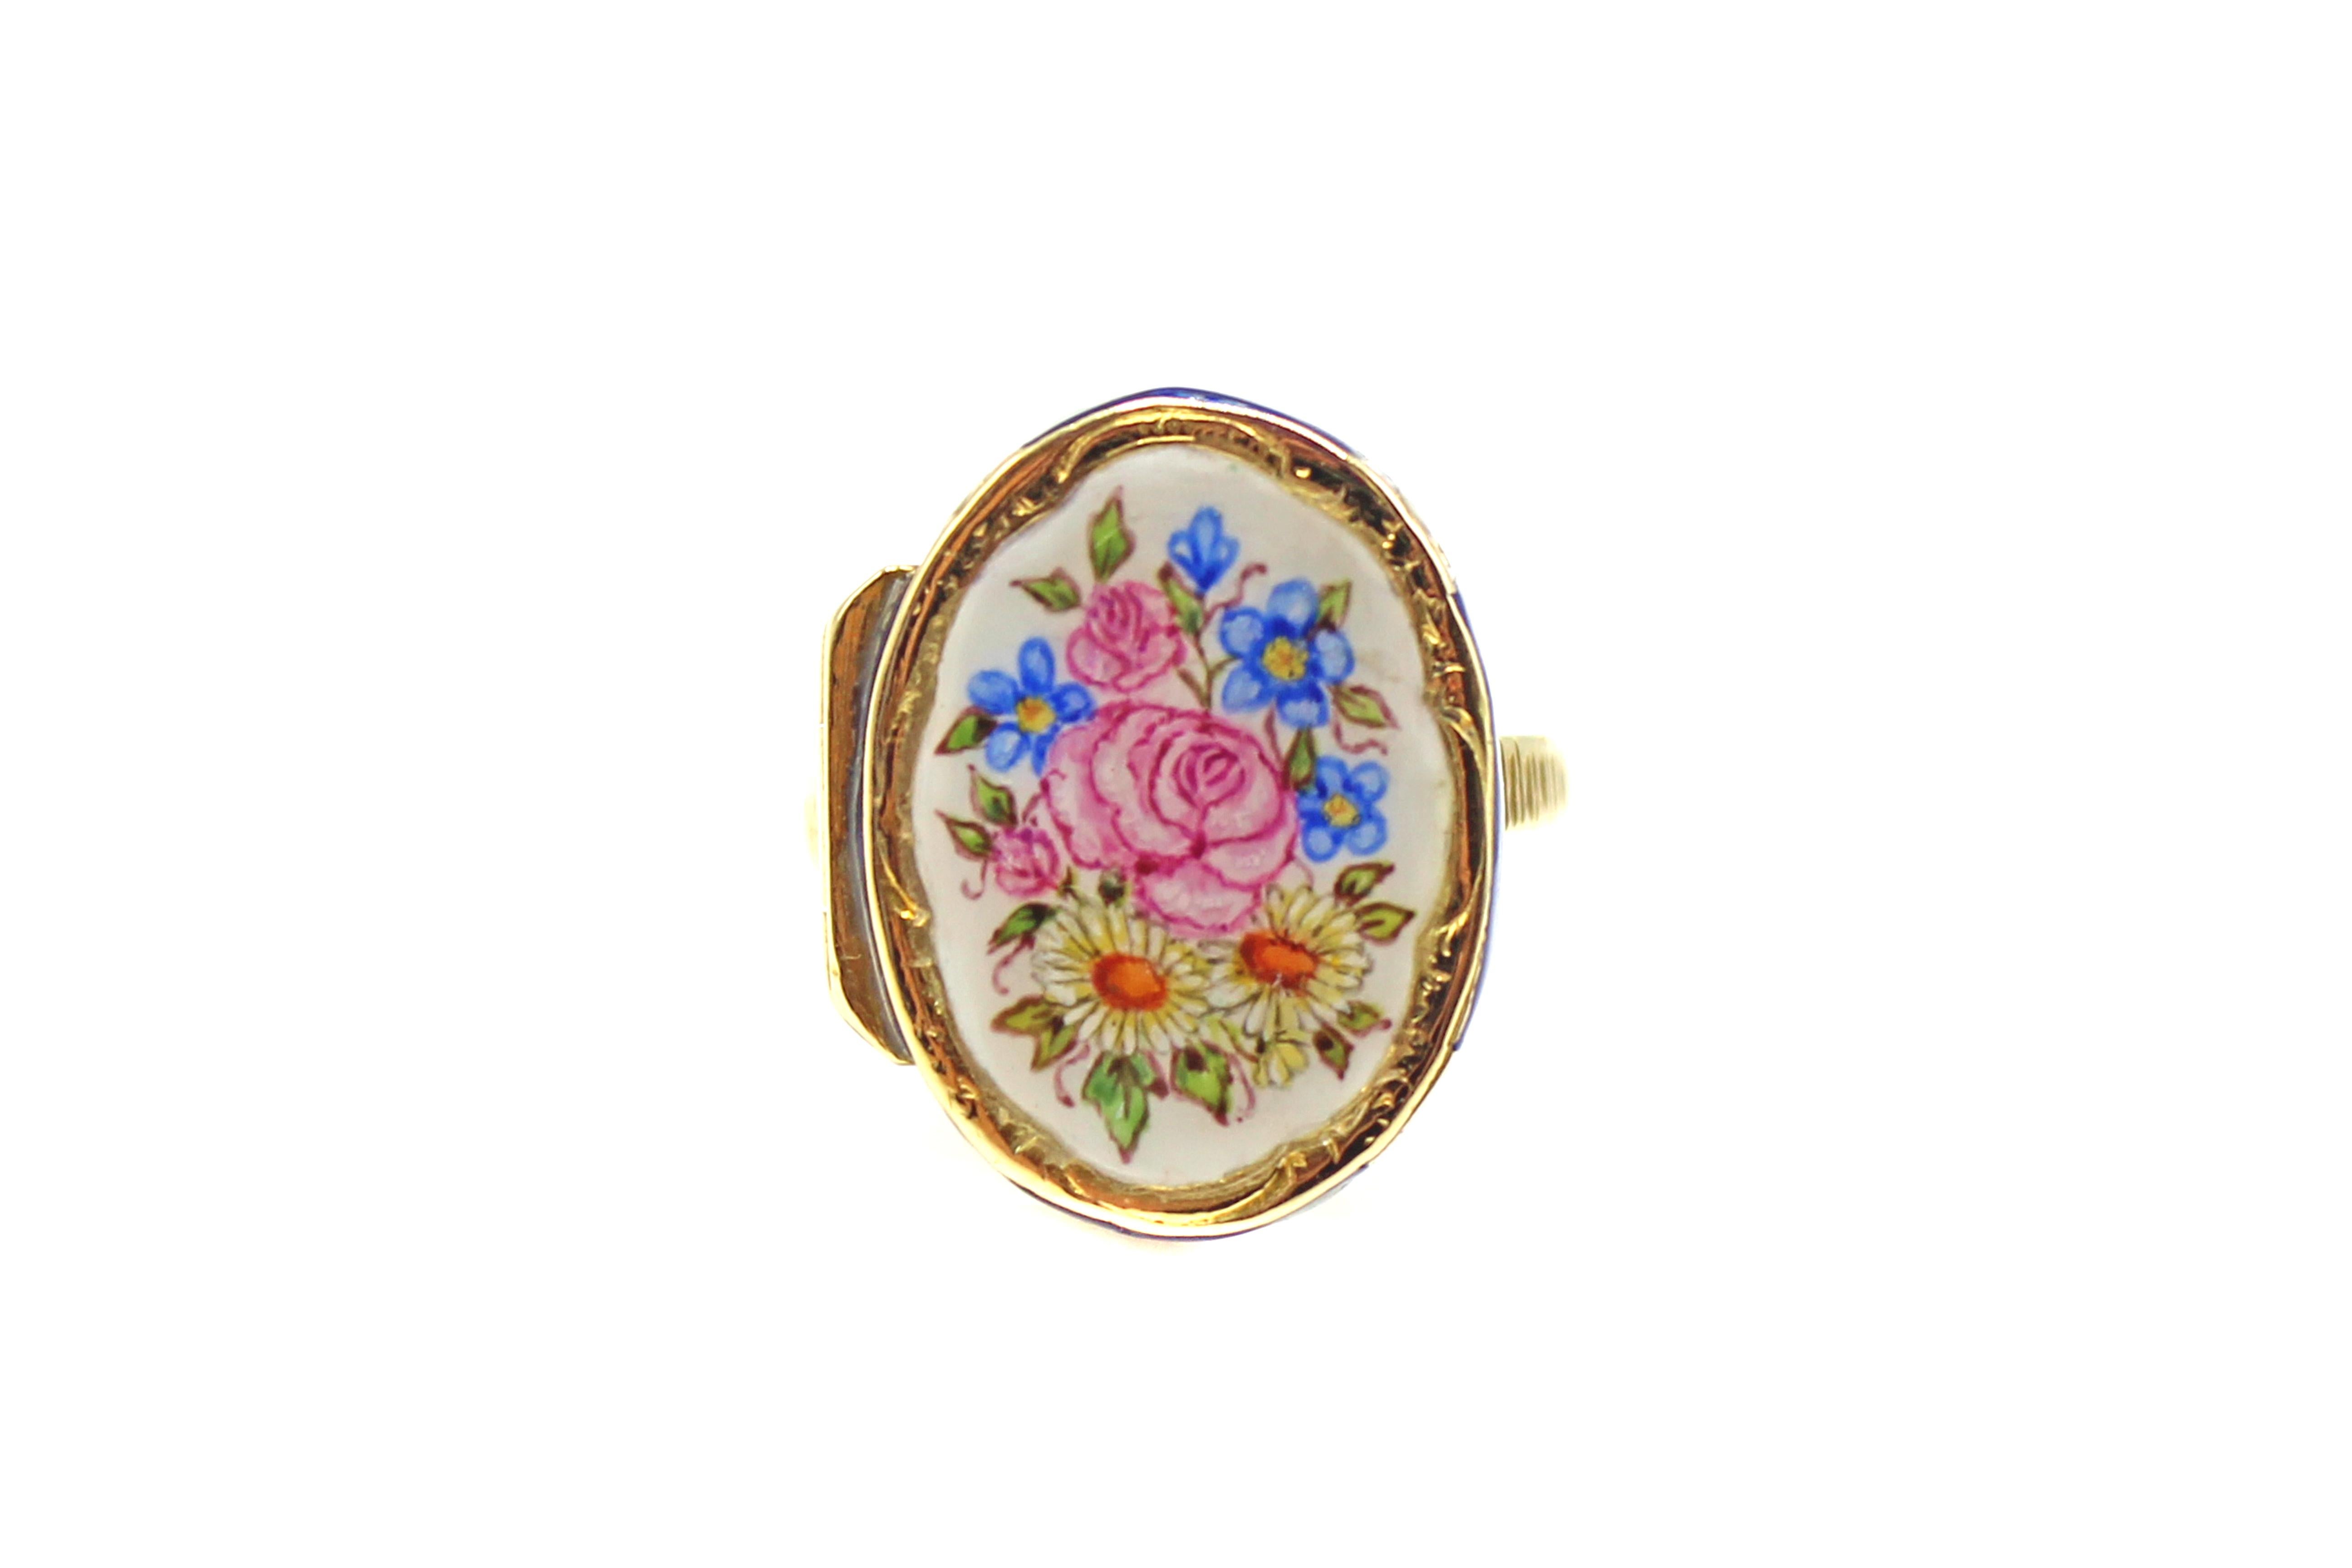 This wonderfully hand-crafted antique ring from the early 19th century displays exquisite Swiss enameling on 18 karat yellow gold. The beautiful floral motif on the top and sides of the ring displayed with pastel colors of pink, blue, green and